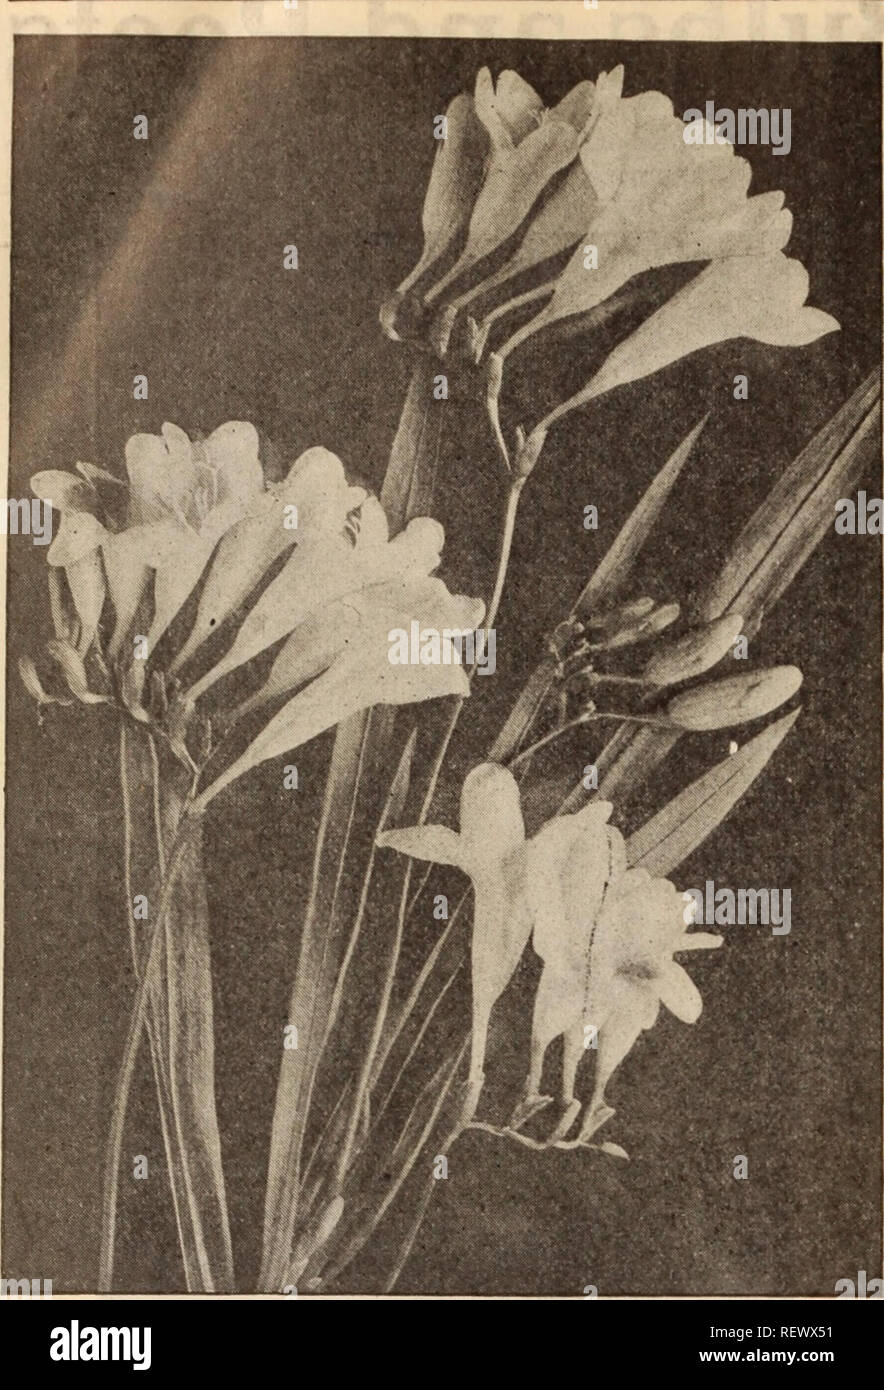 . Dreer's wholesale price list / Henry A. Dreer.. Nursery Catalogue. 10 HENRY A. DREER, PHILADELPHIA, PA., WHOLESALE PRICE LIST. FREESIA IMPROVED PURITY Calochortus. Per 100 Per 1000 Mixed. All colors |1 25 $10 00 Chionodoxa (Glory of the Snow). LuclIIse 75 6 50 Qigantea 85 7 50 Sardensis 75 6 50 Tmouisi ... 1 00 8 00 Clivia (Imantophyllum). Each Per doz. Miniatum. Strong 50 $5 00 Crocus. While chiefly used for planting out of doors, they can be used for pot culture (the named varieties are best for this purpose) and find ready sale in the early spring months. Mammoth Named Crocus. These are l Stock Photo